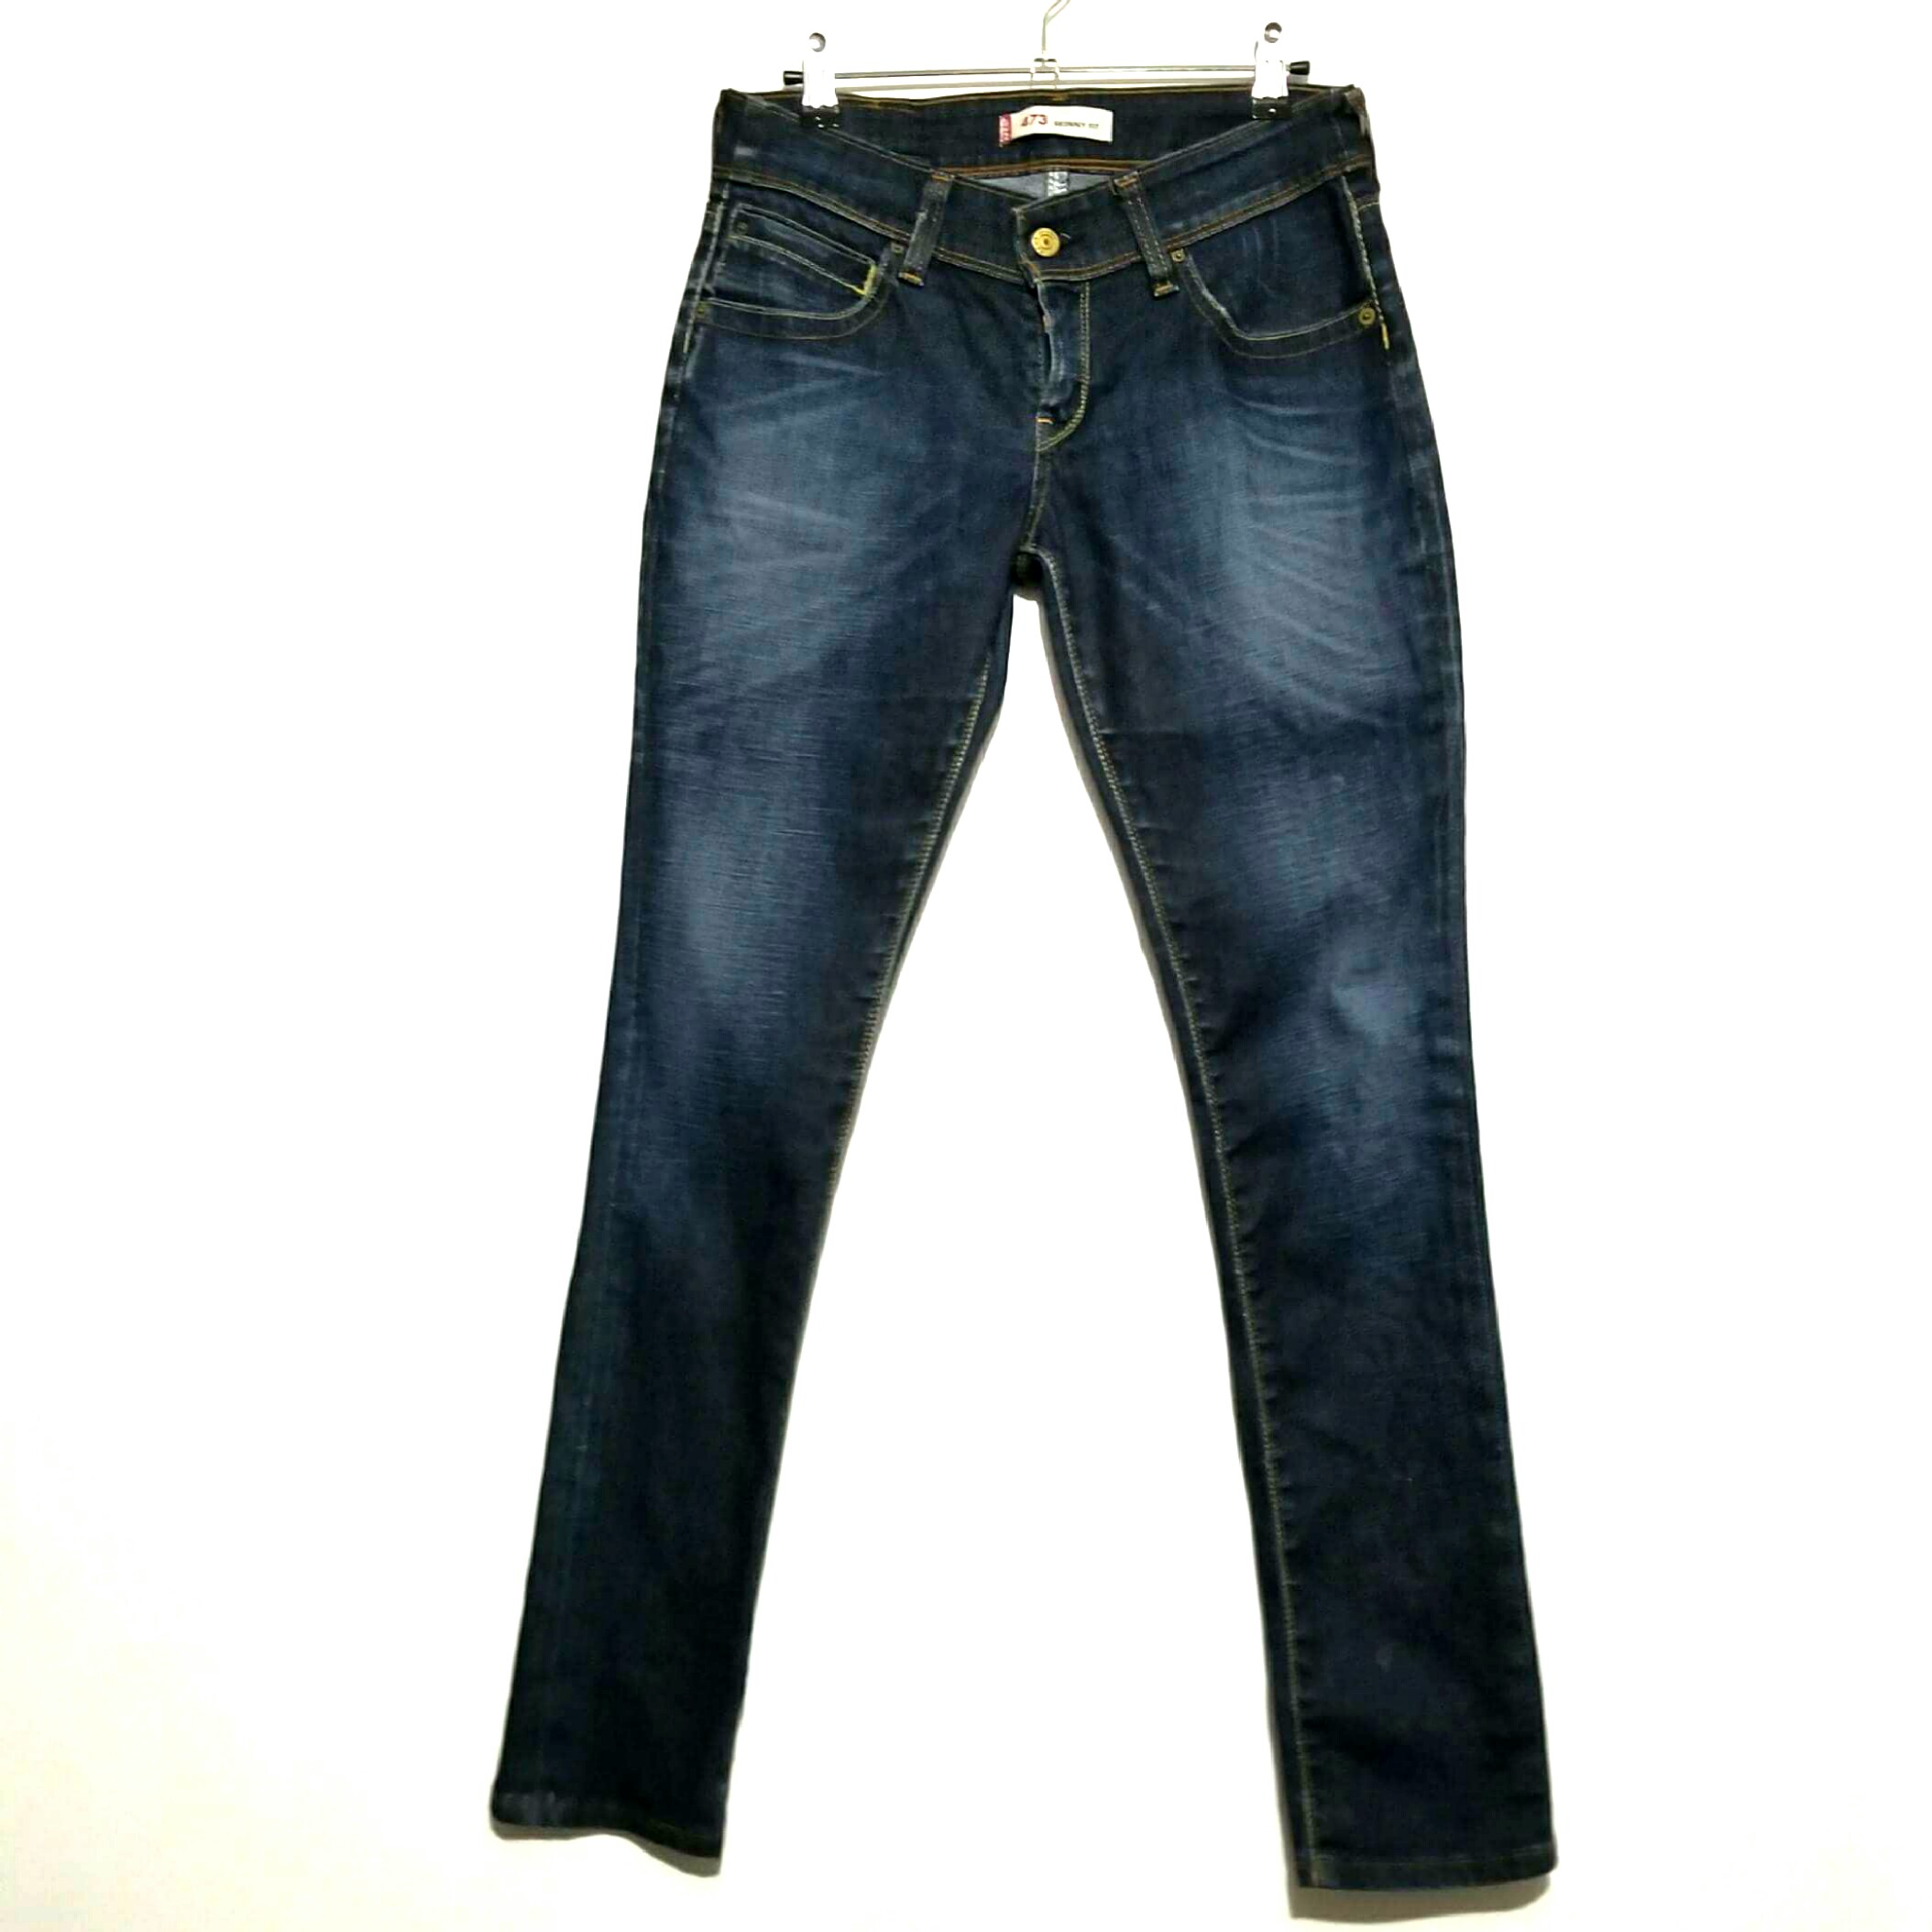 levis 473 skinny fit jeans